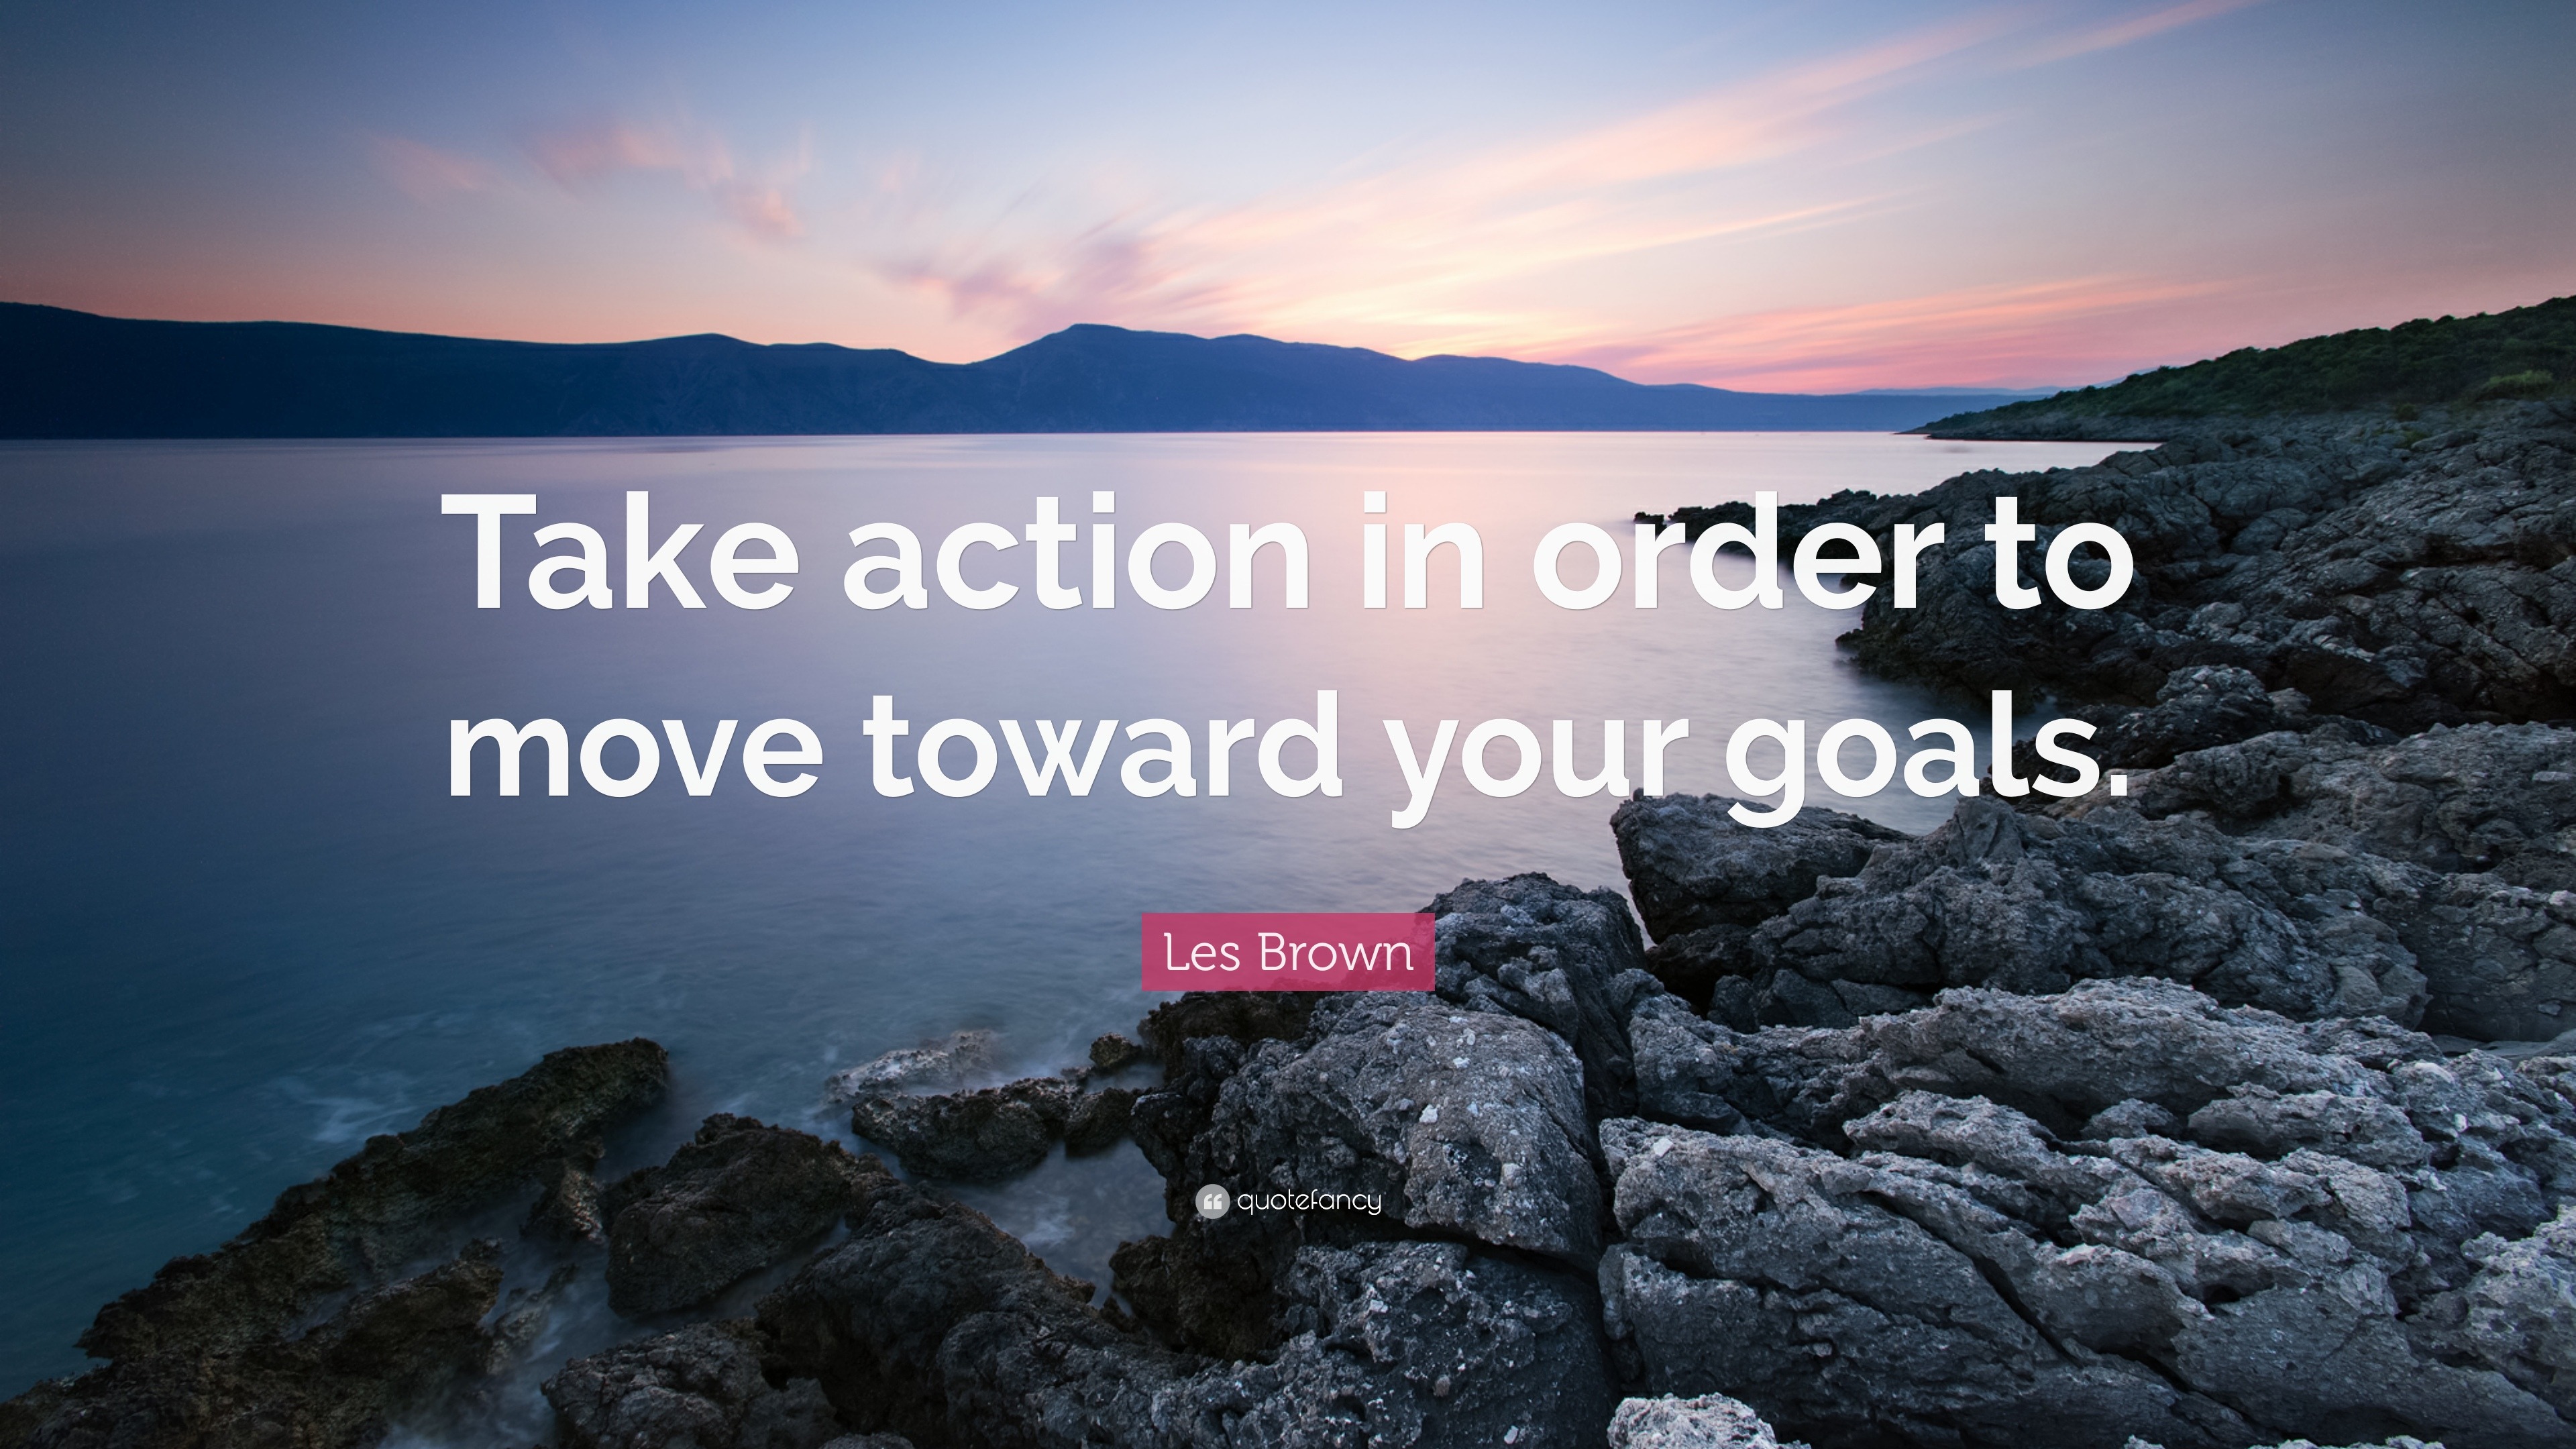 Les Brown Quote “take Action In Order To Move Toward Your Goals”